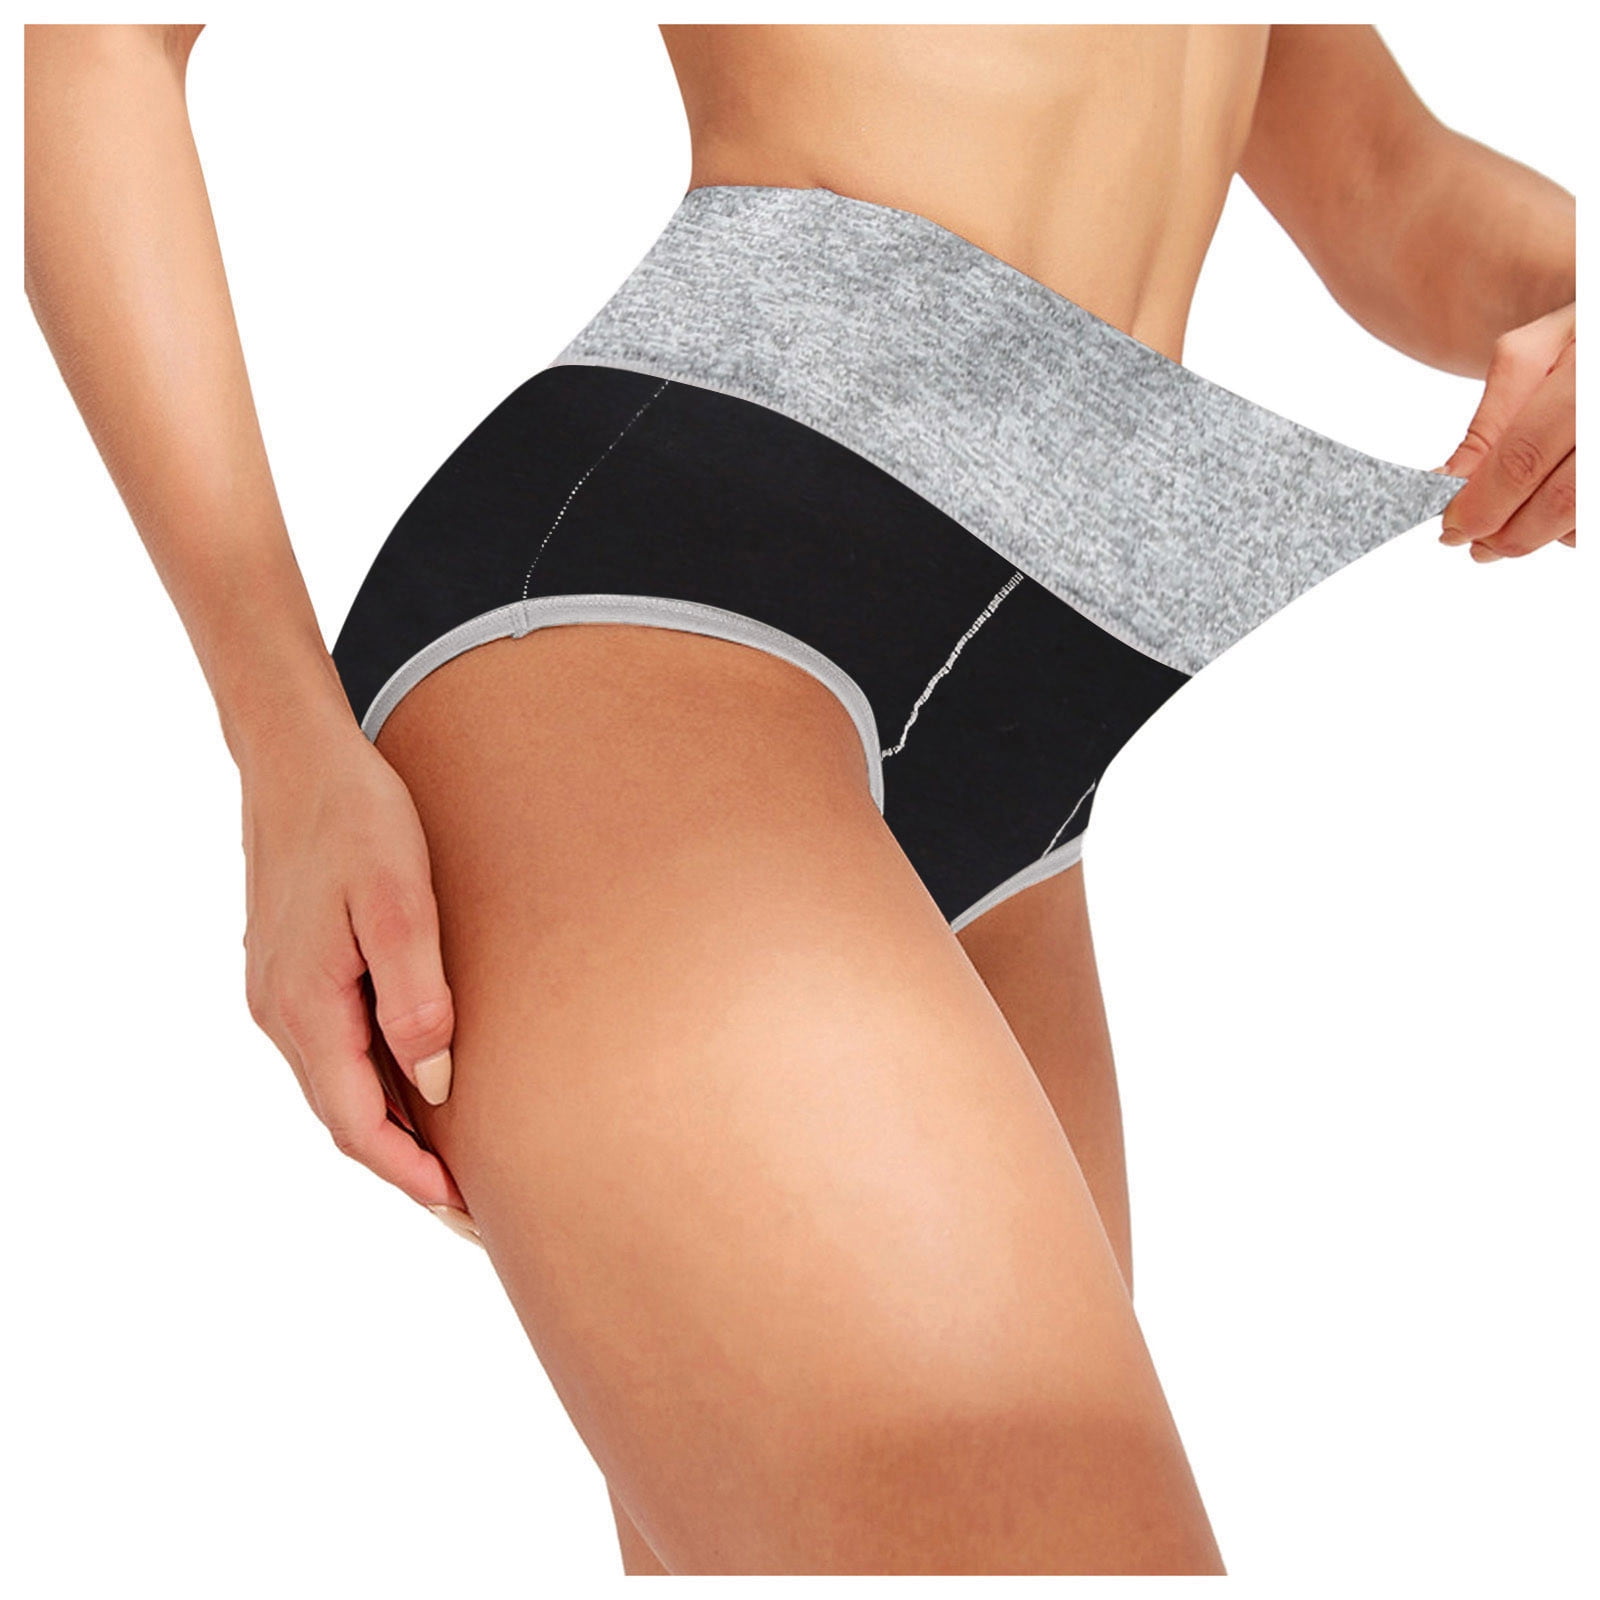 Underwear For Women Cotton No Muffin Top Full Coverage Briefs Soft Stretch Ladies  Panties 4 Pack